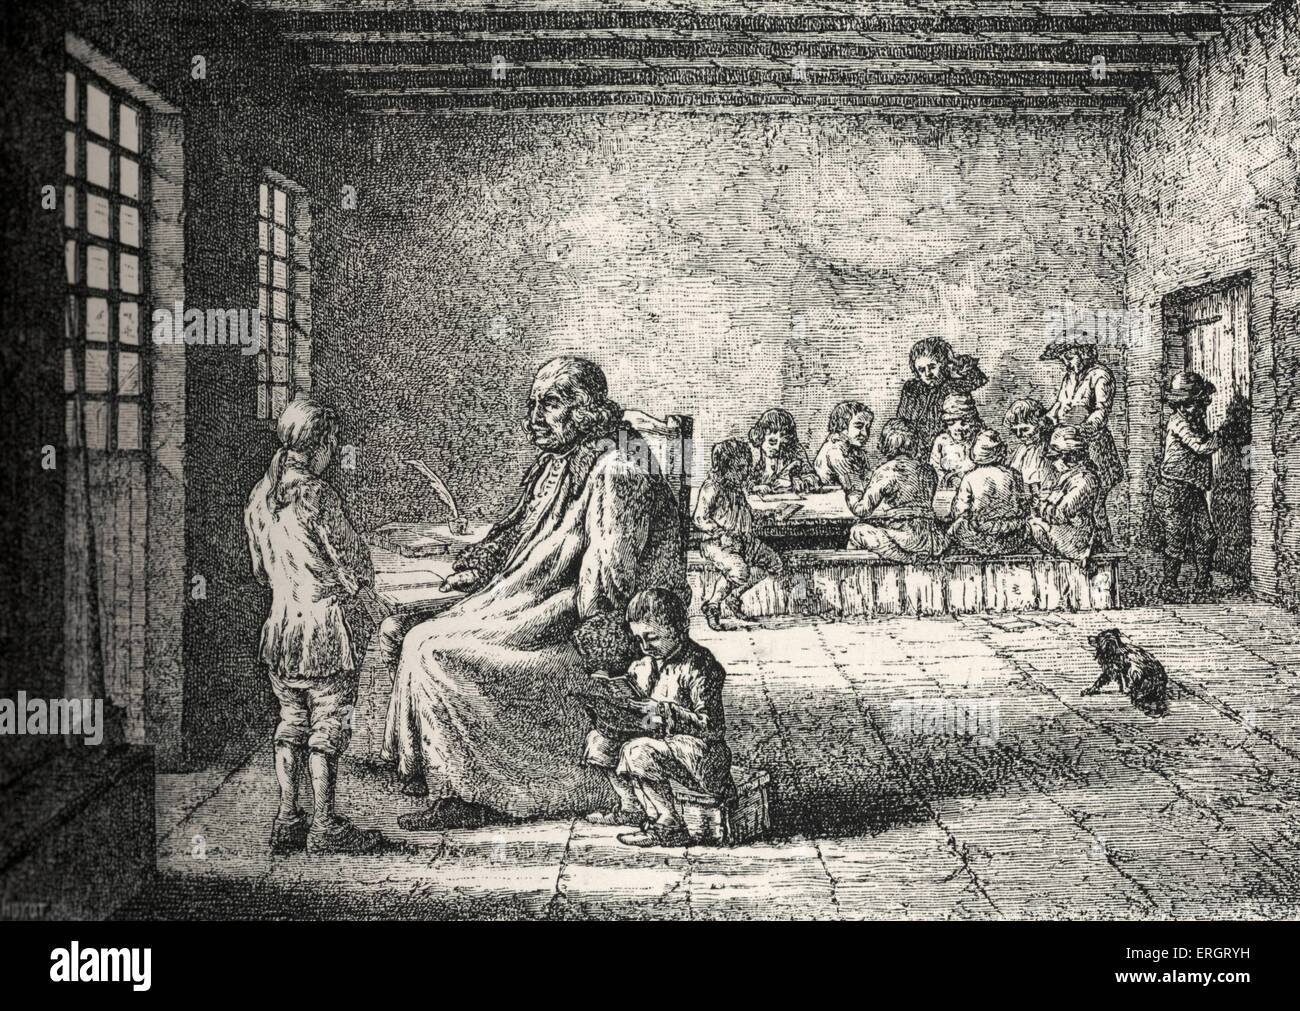 Daily life in French history: the education of children by a schoolmaster in 18th century France. Stock Photo